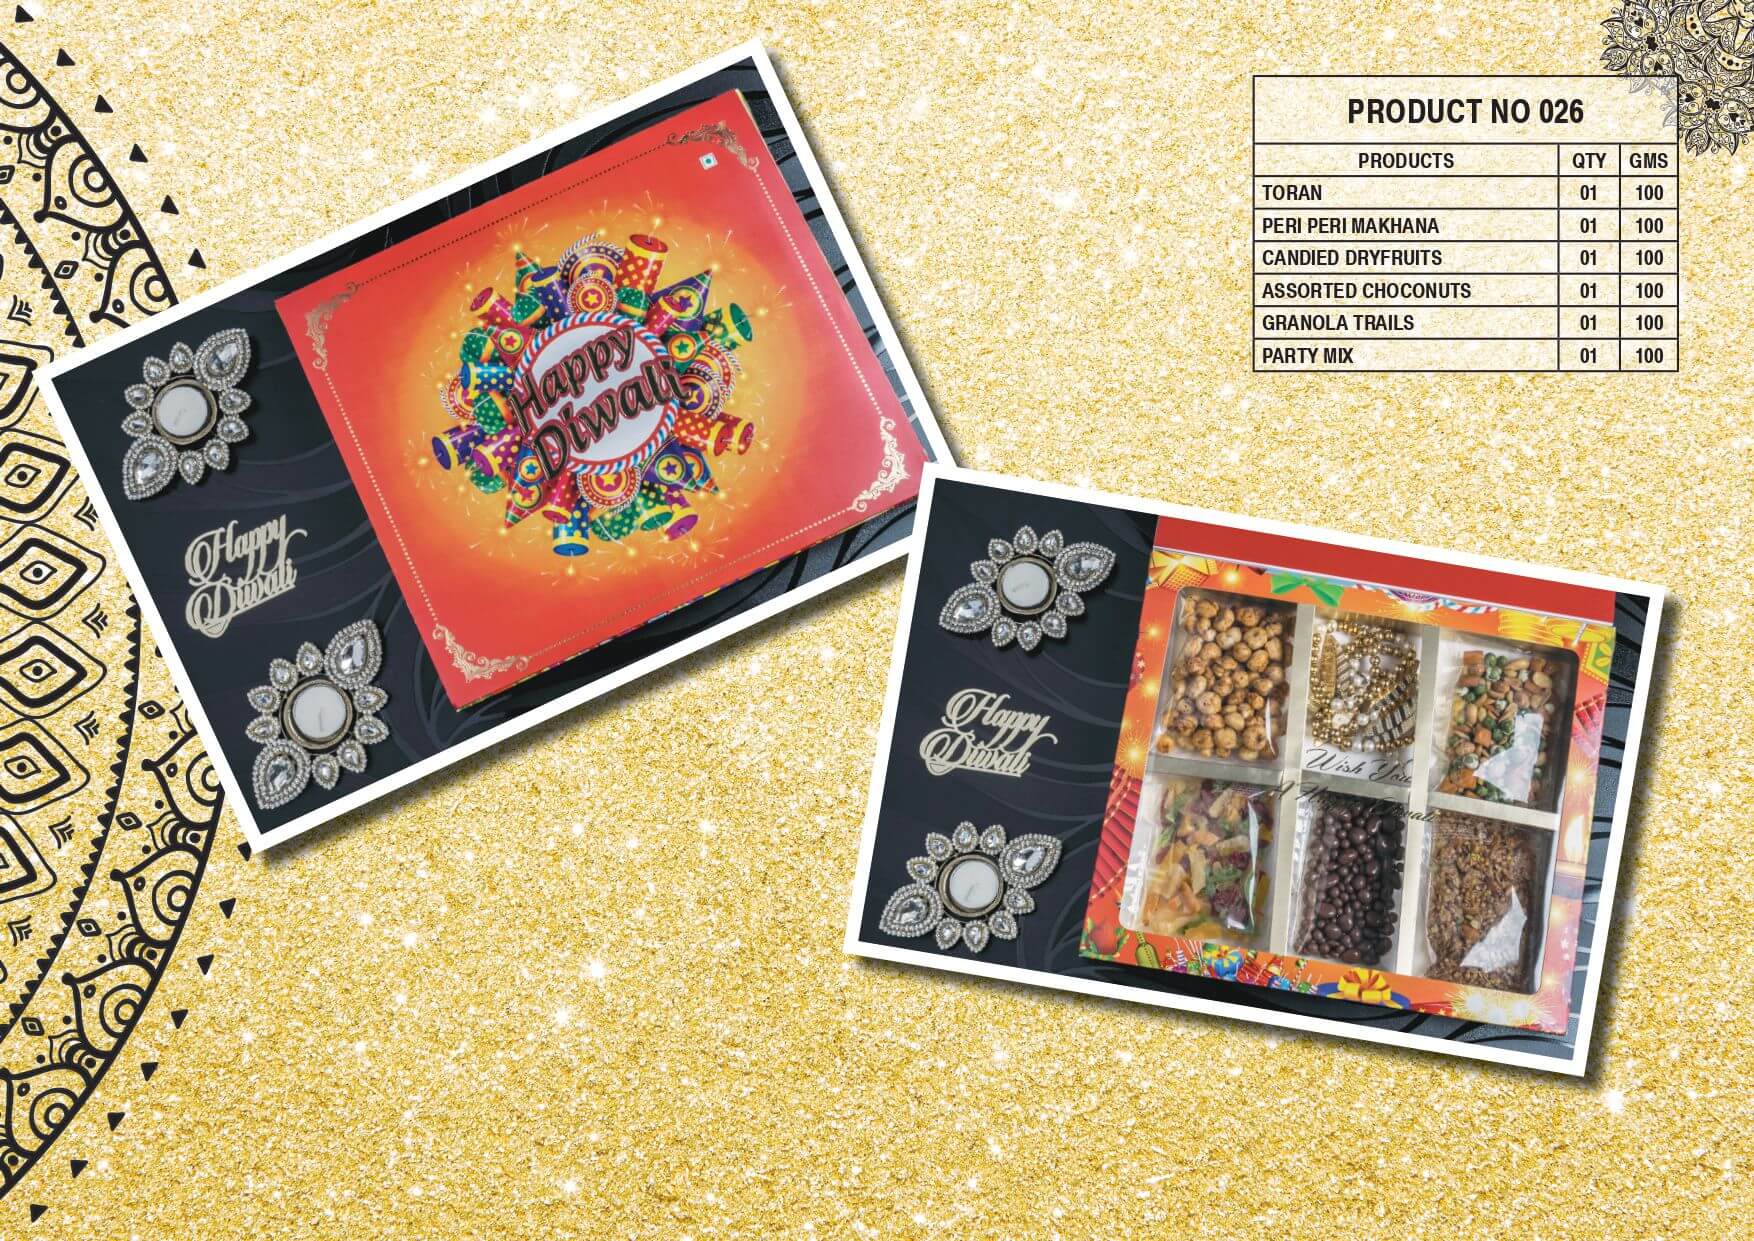 Diwali Gifts Supplier In Mumbai PRODUCT NO 026